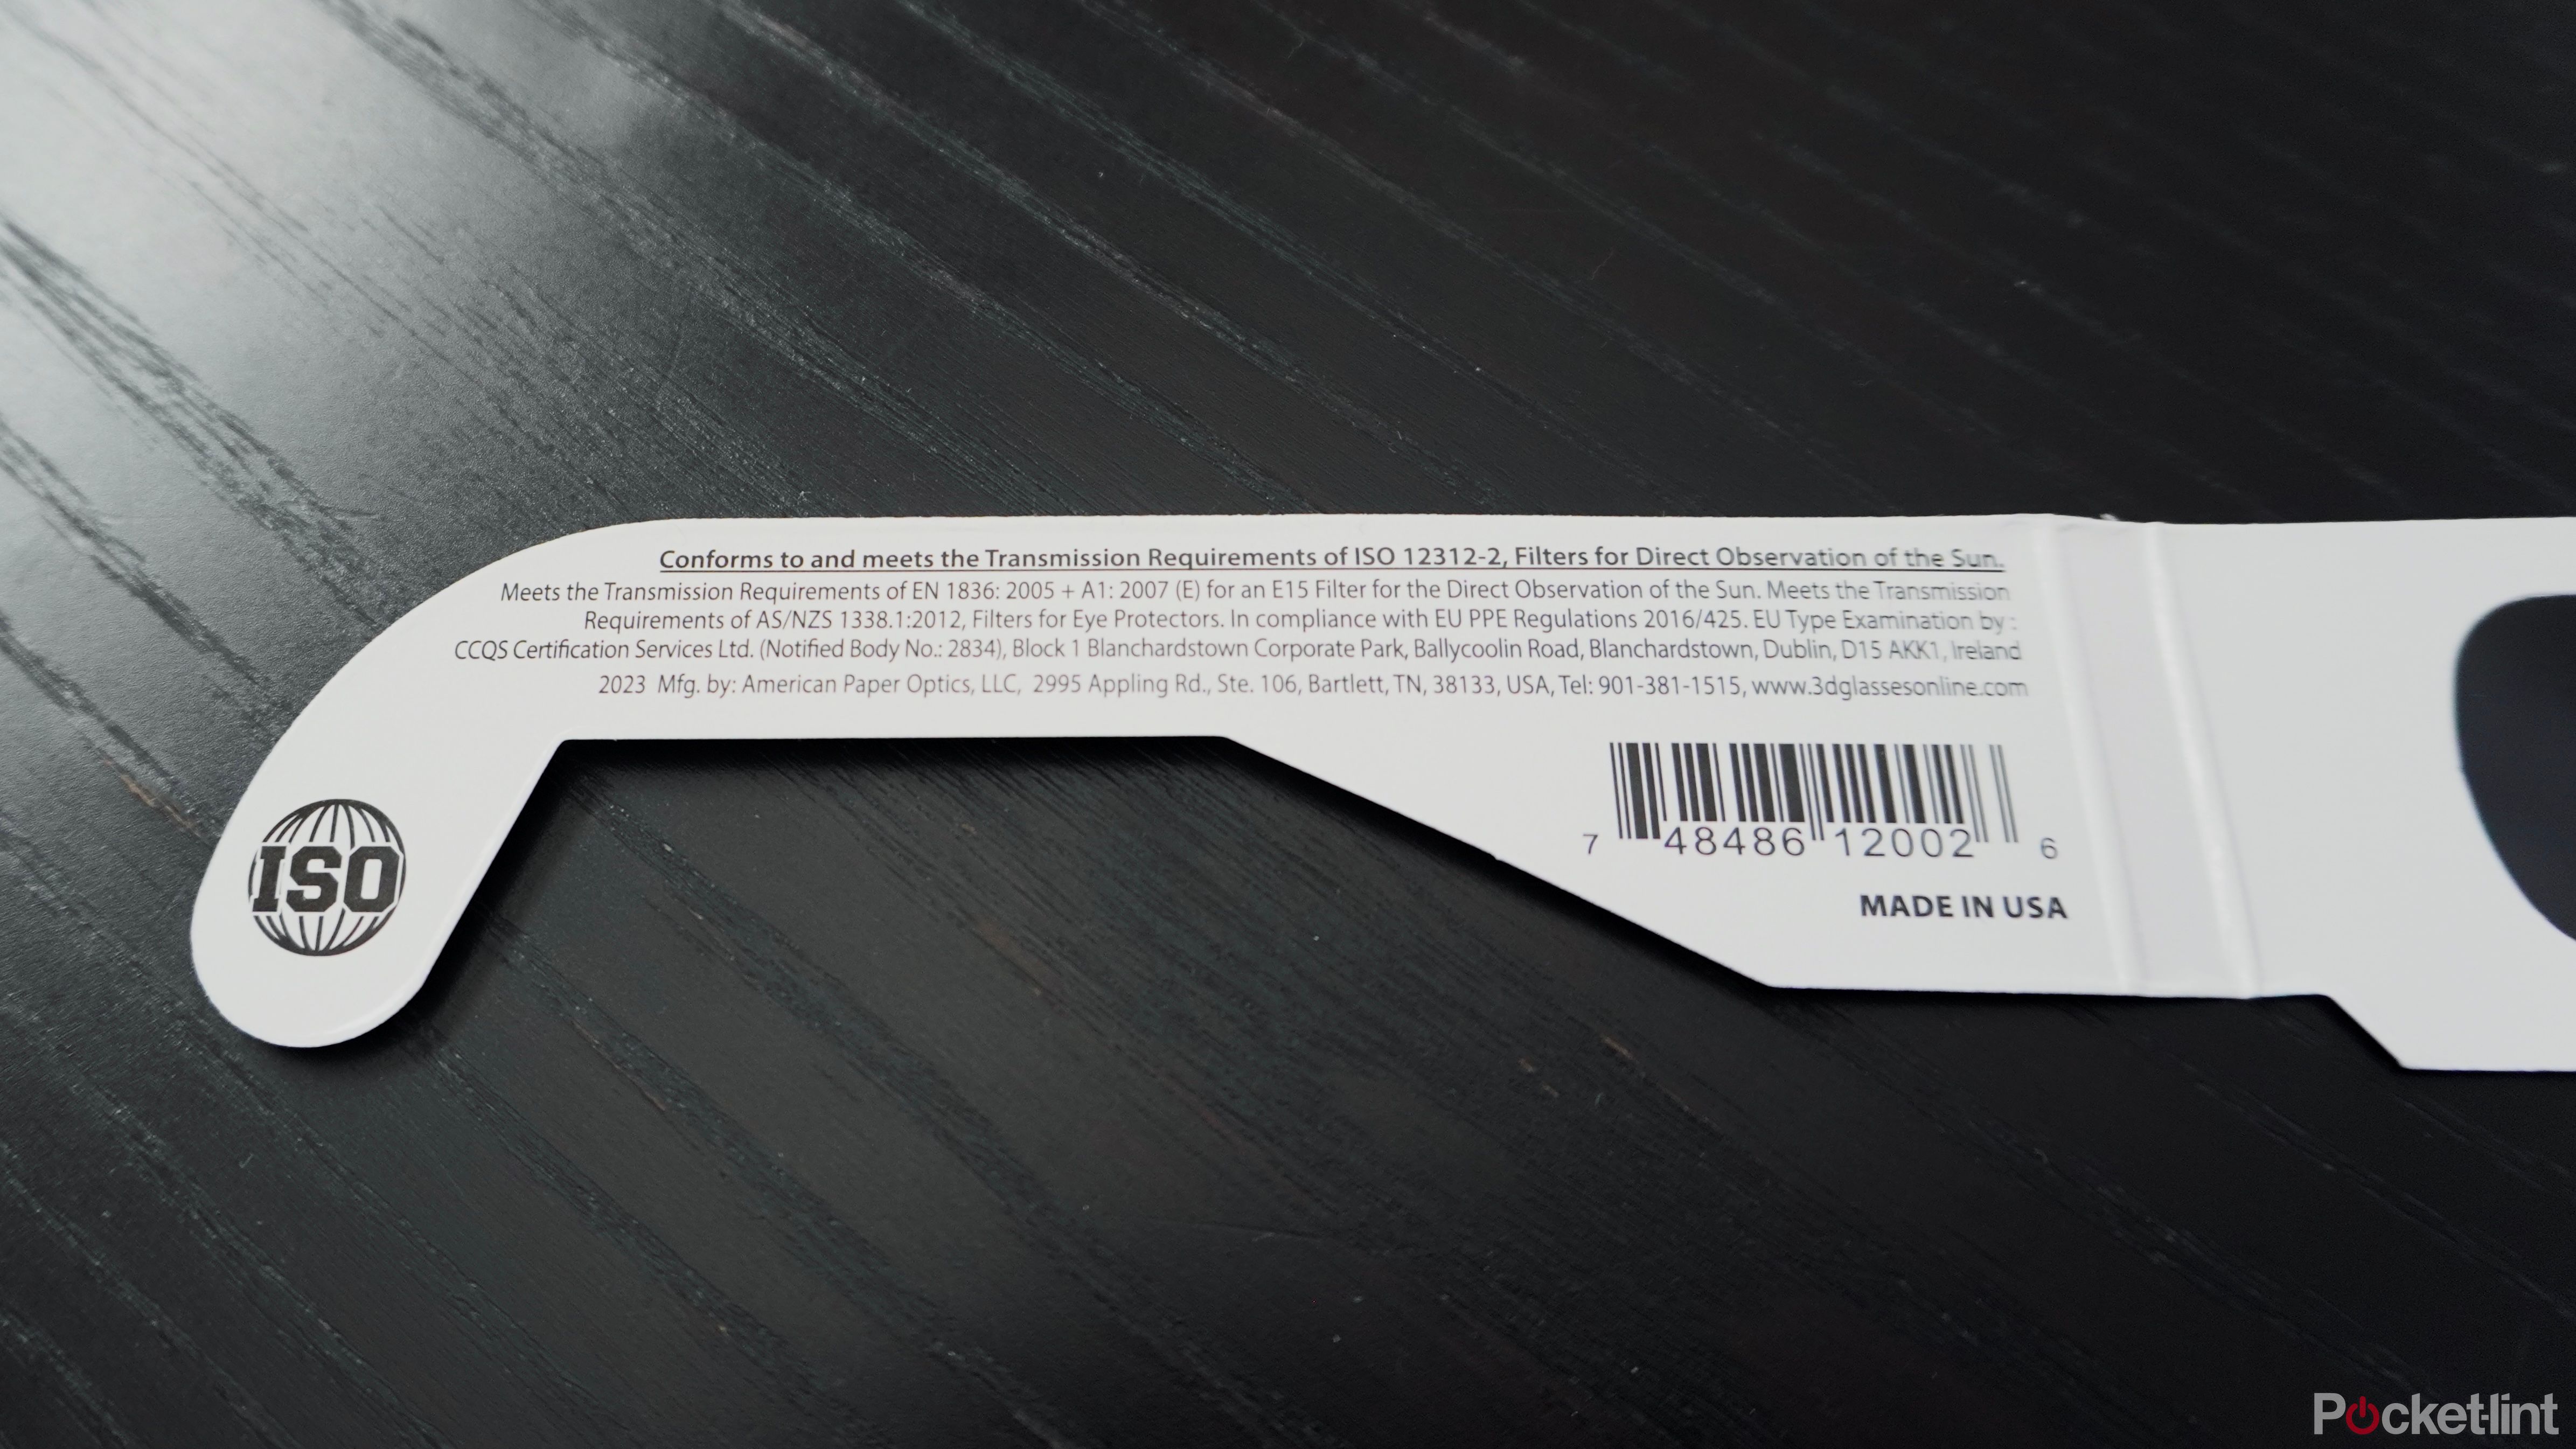 The label confirming solar eclipse glasses meet ISO requirements.